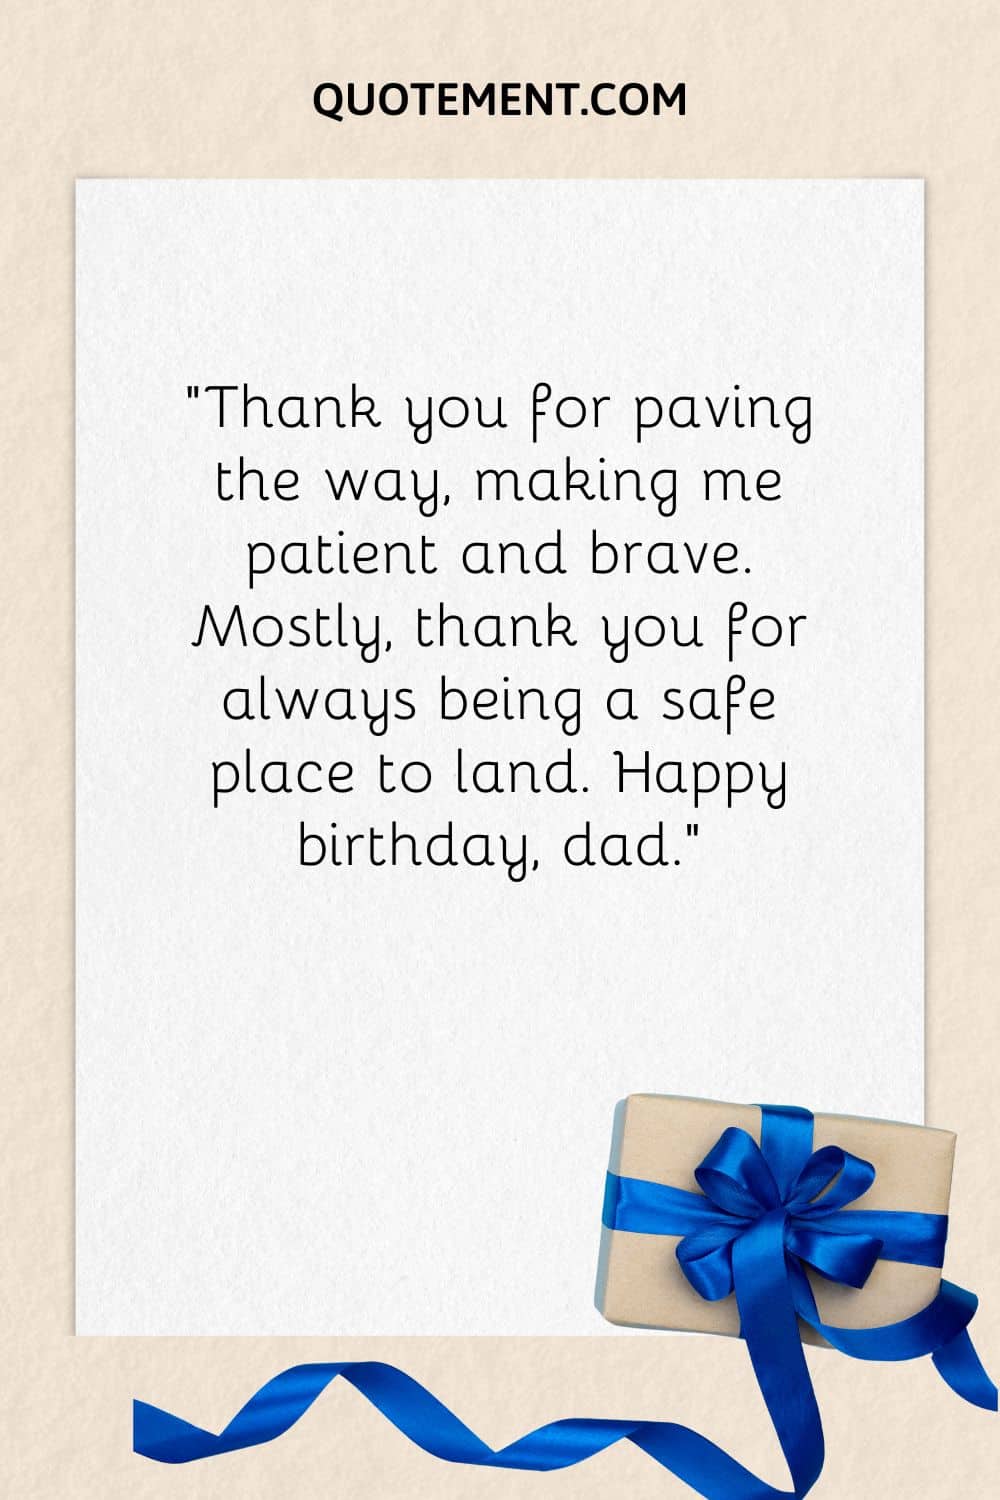 “Thank you for paving the way, making me patient and brave. Mostly, thank you for always being a safe place to land. Happy birthday, dad.”